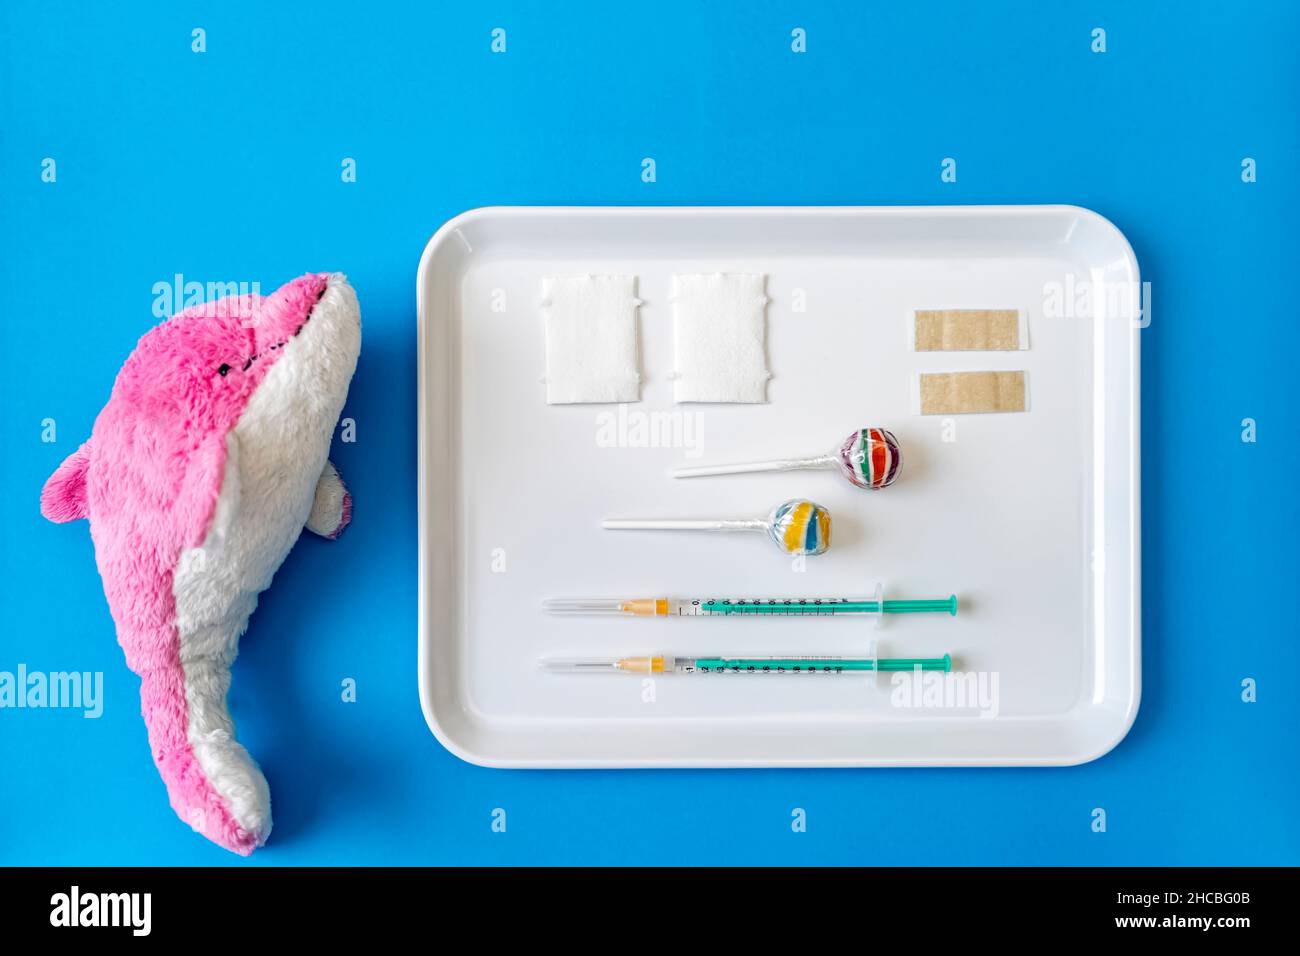 Stuffed dolphin toy by tray of vaccine injections and lollipop on blue background Stock Photo